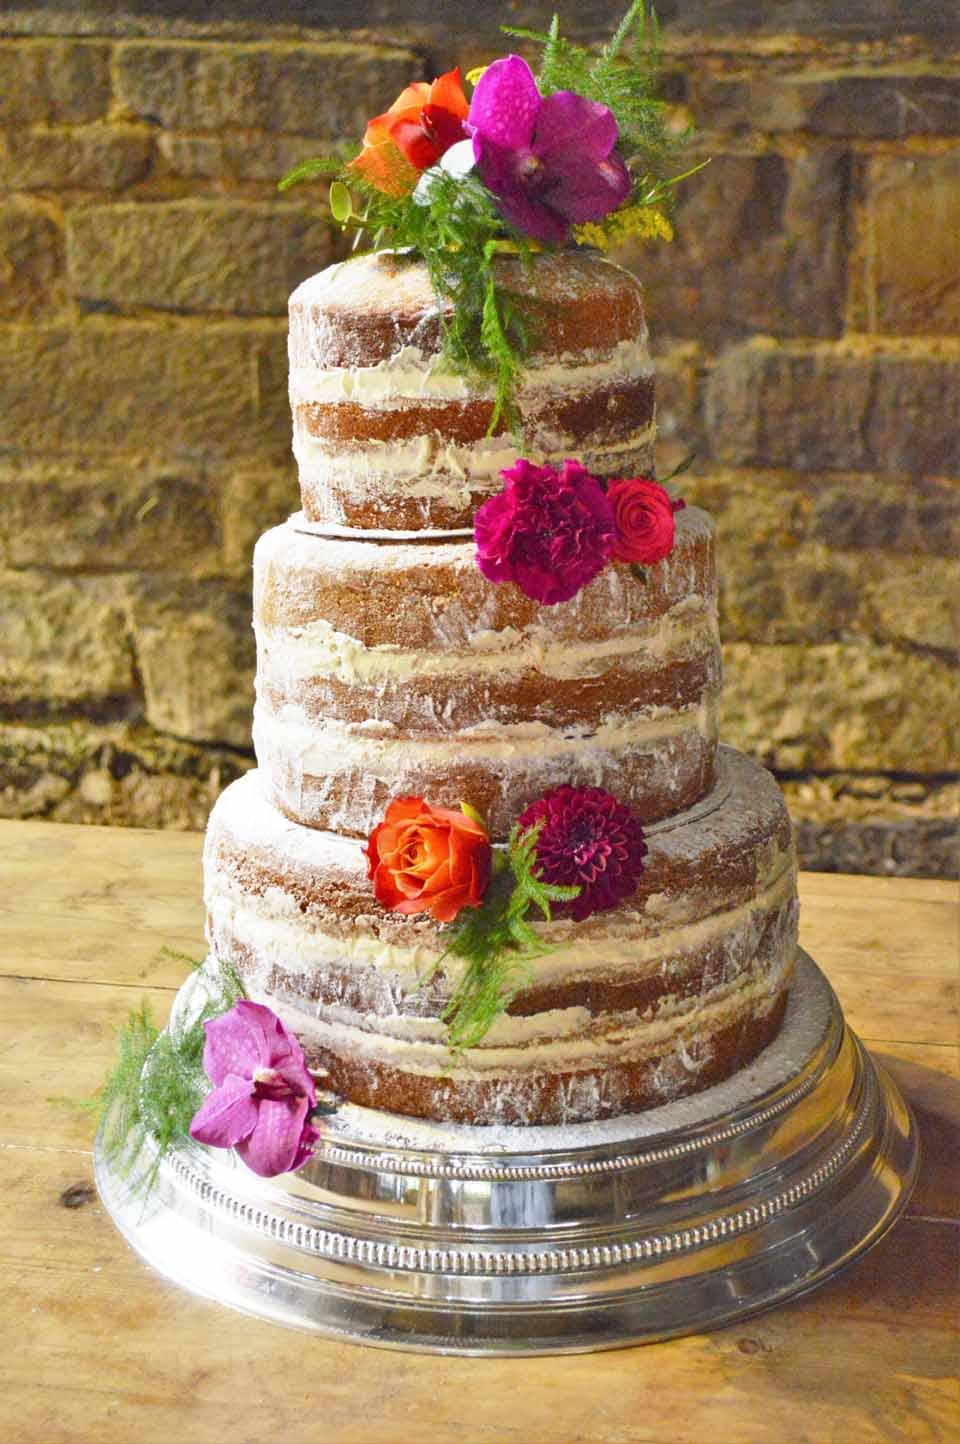 naked cake sussex orchids dahlias roses and fern